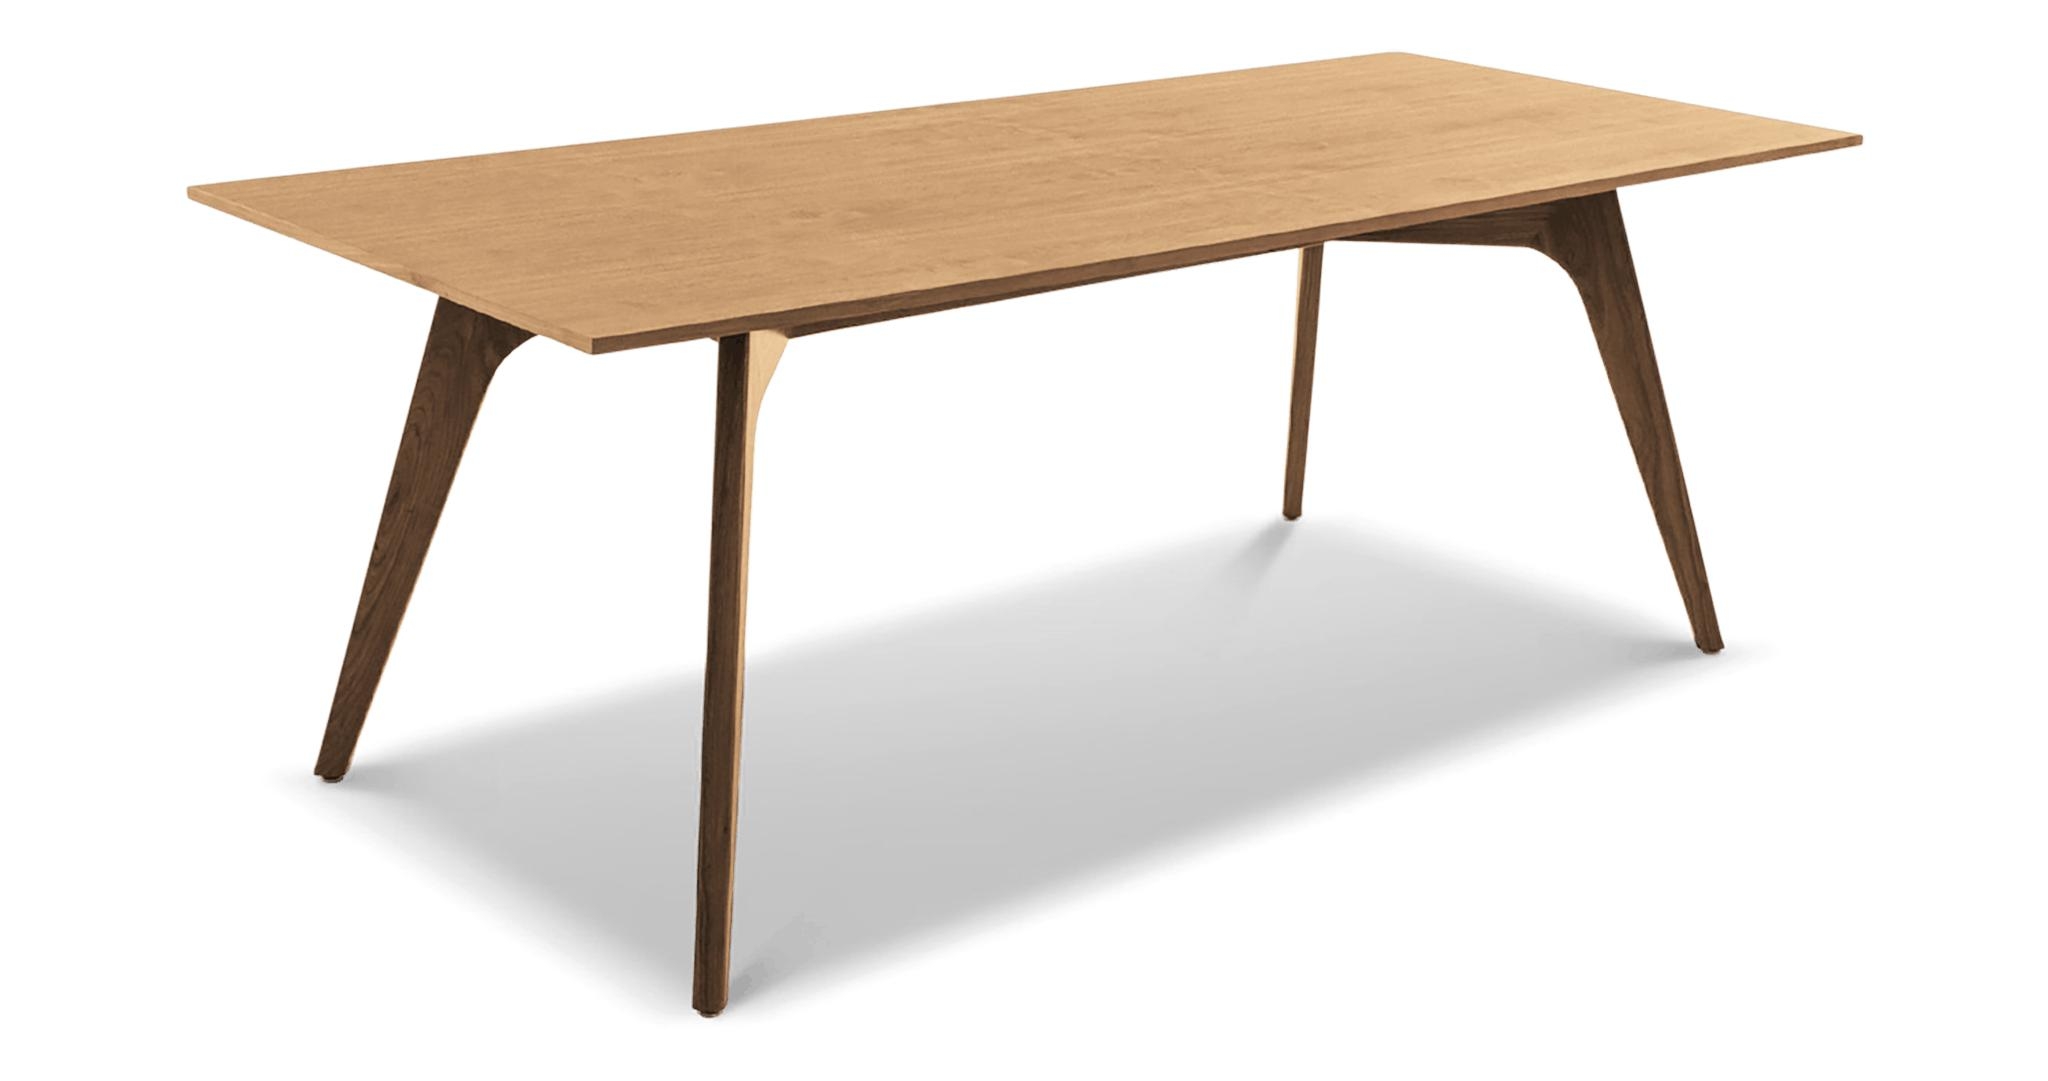 Hesse Mid Century Modern (Wood Top) Dining Table - Cherry - Image 1